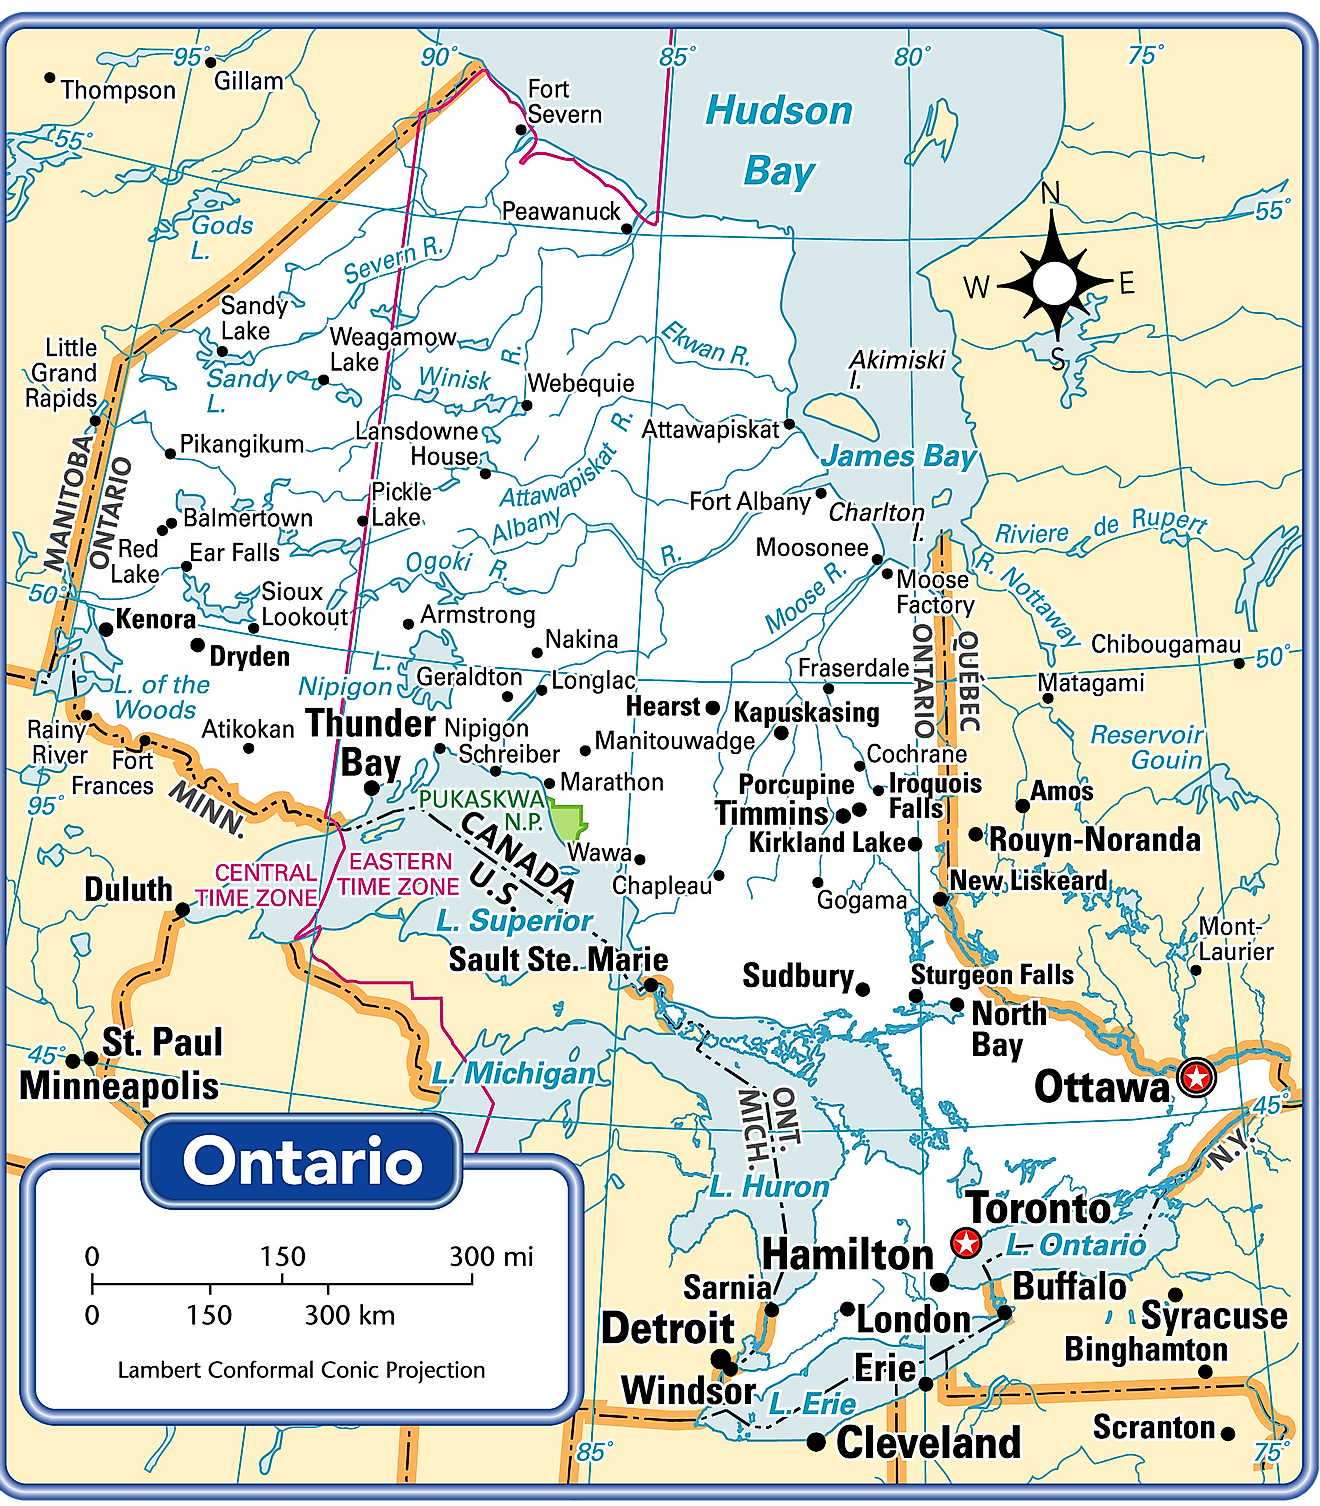 Administrative Map of Ontario showing its various municipalities and its capital city - Toronto